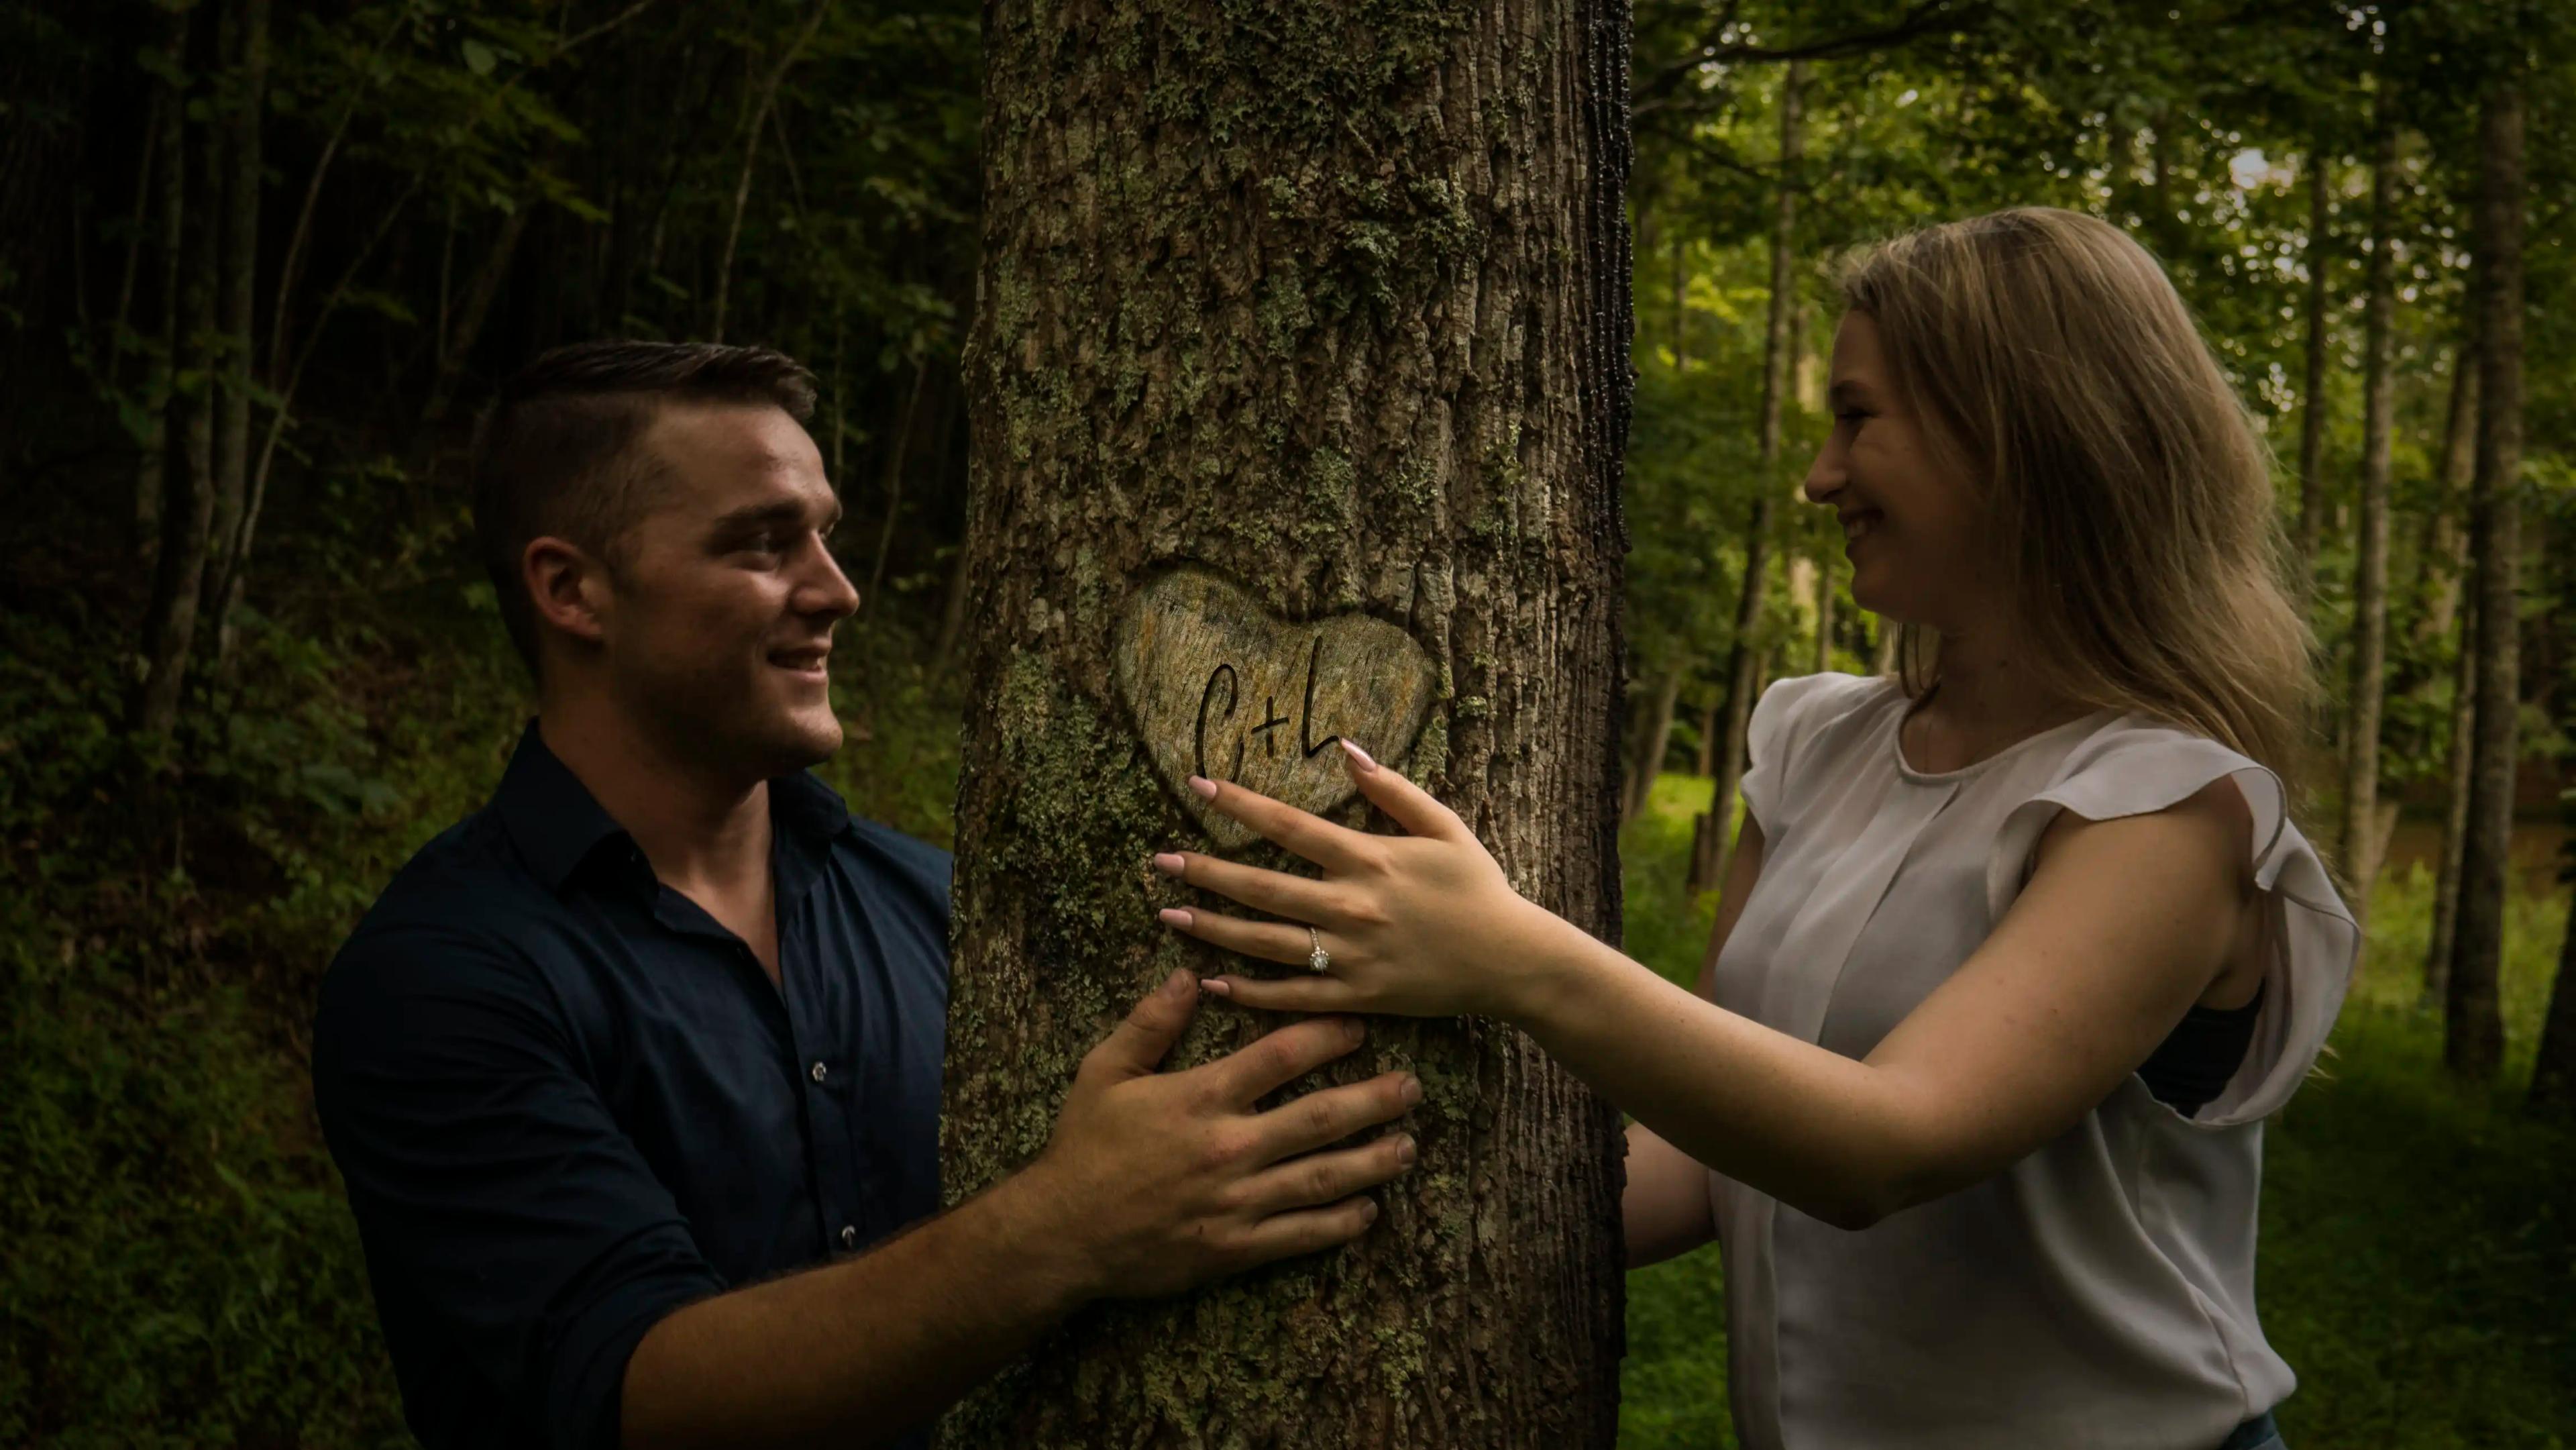 C + L smiling looking at each other with a tree between them with their initials carved into it.